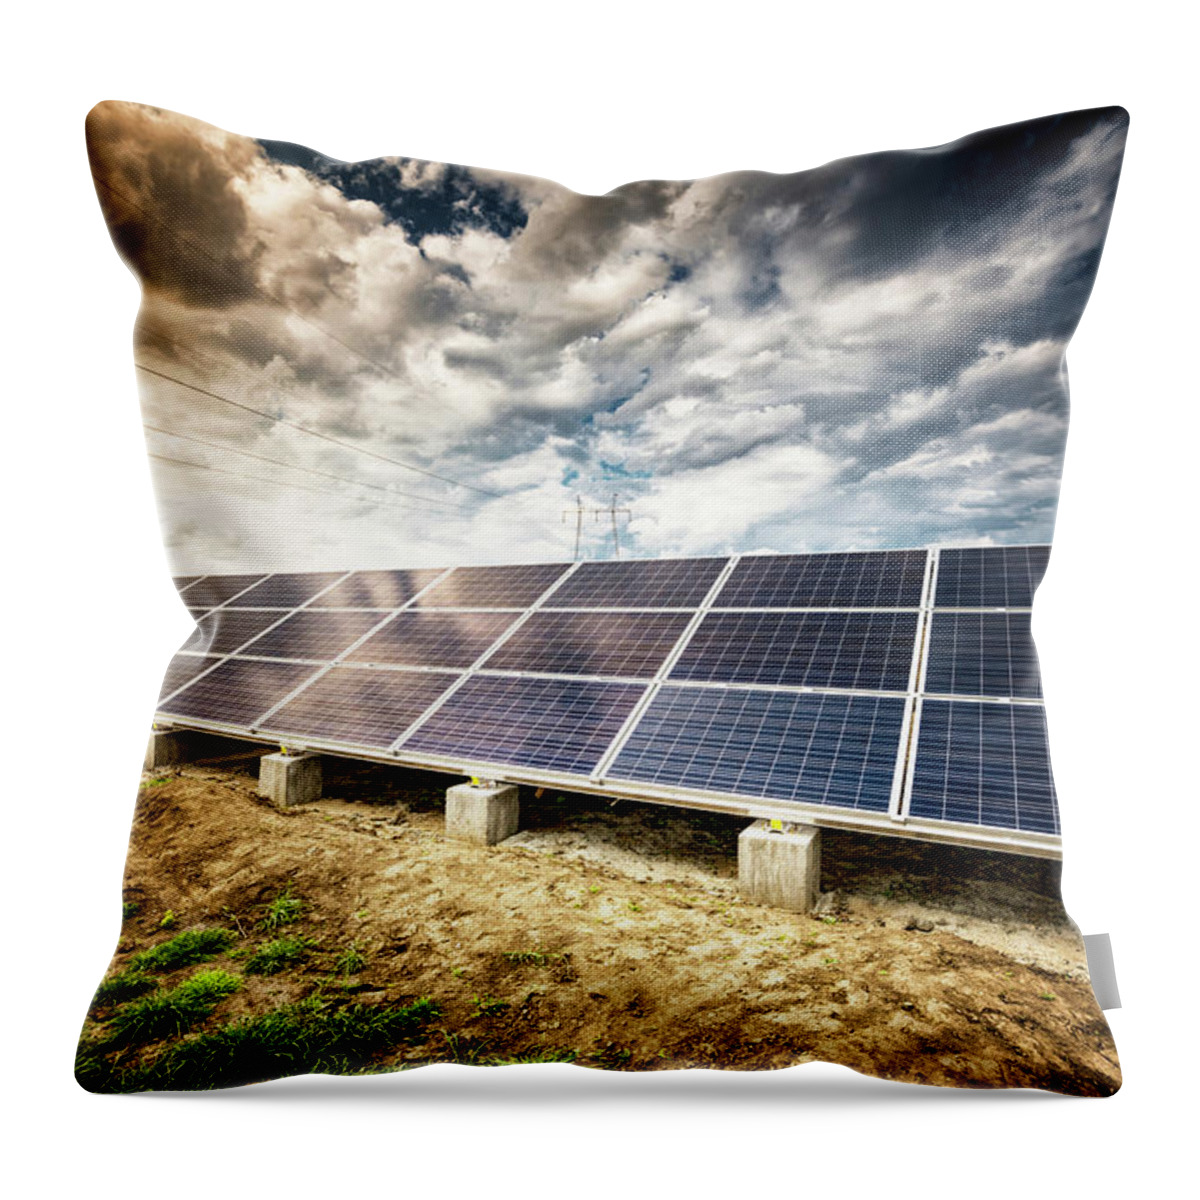 Environmental Conservation Throw Pillow featuring the photograph Solar Energy Panels by Egon69